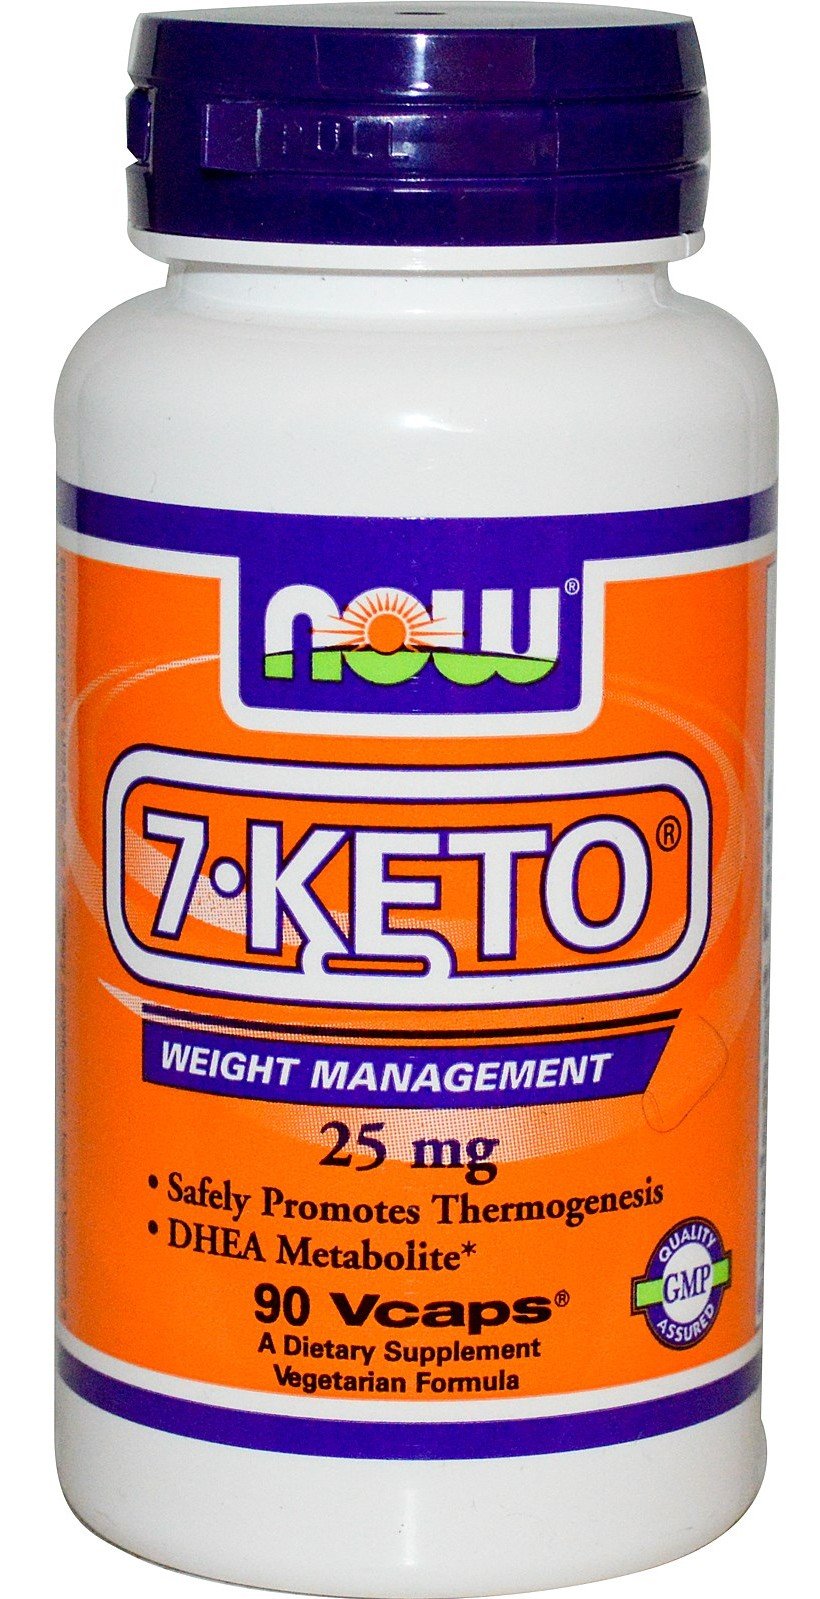 7-KETO 25 mg, 90 pcs, Now. Special supplements. 